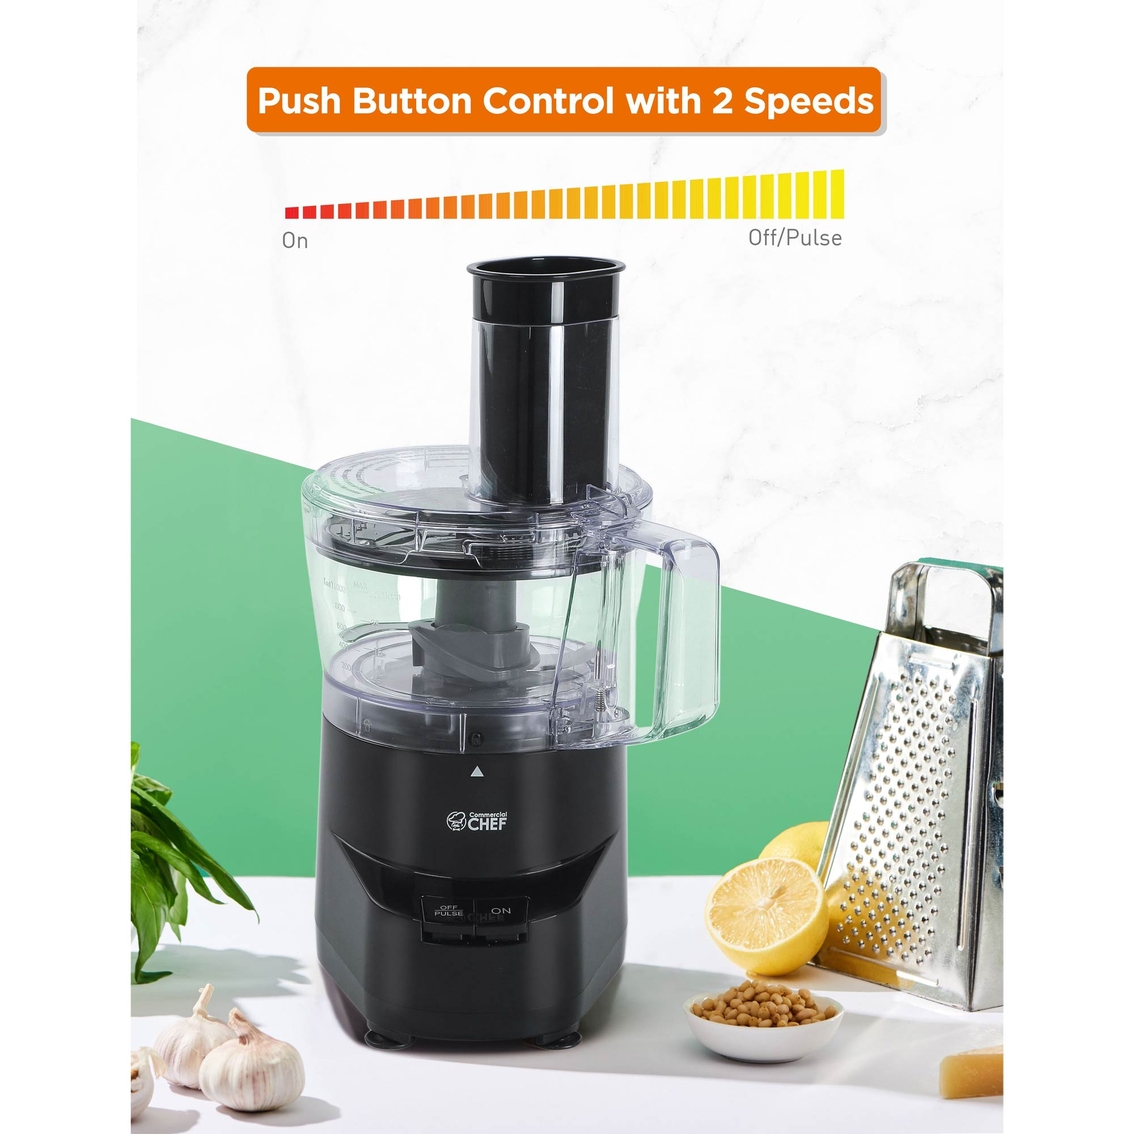 Commercial Chef 4 Cup Food Processor - Image 9 of 10